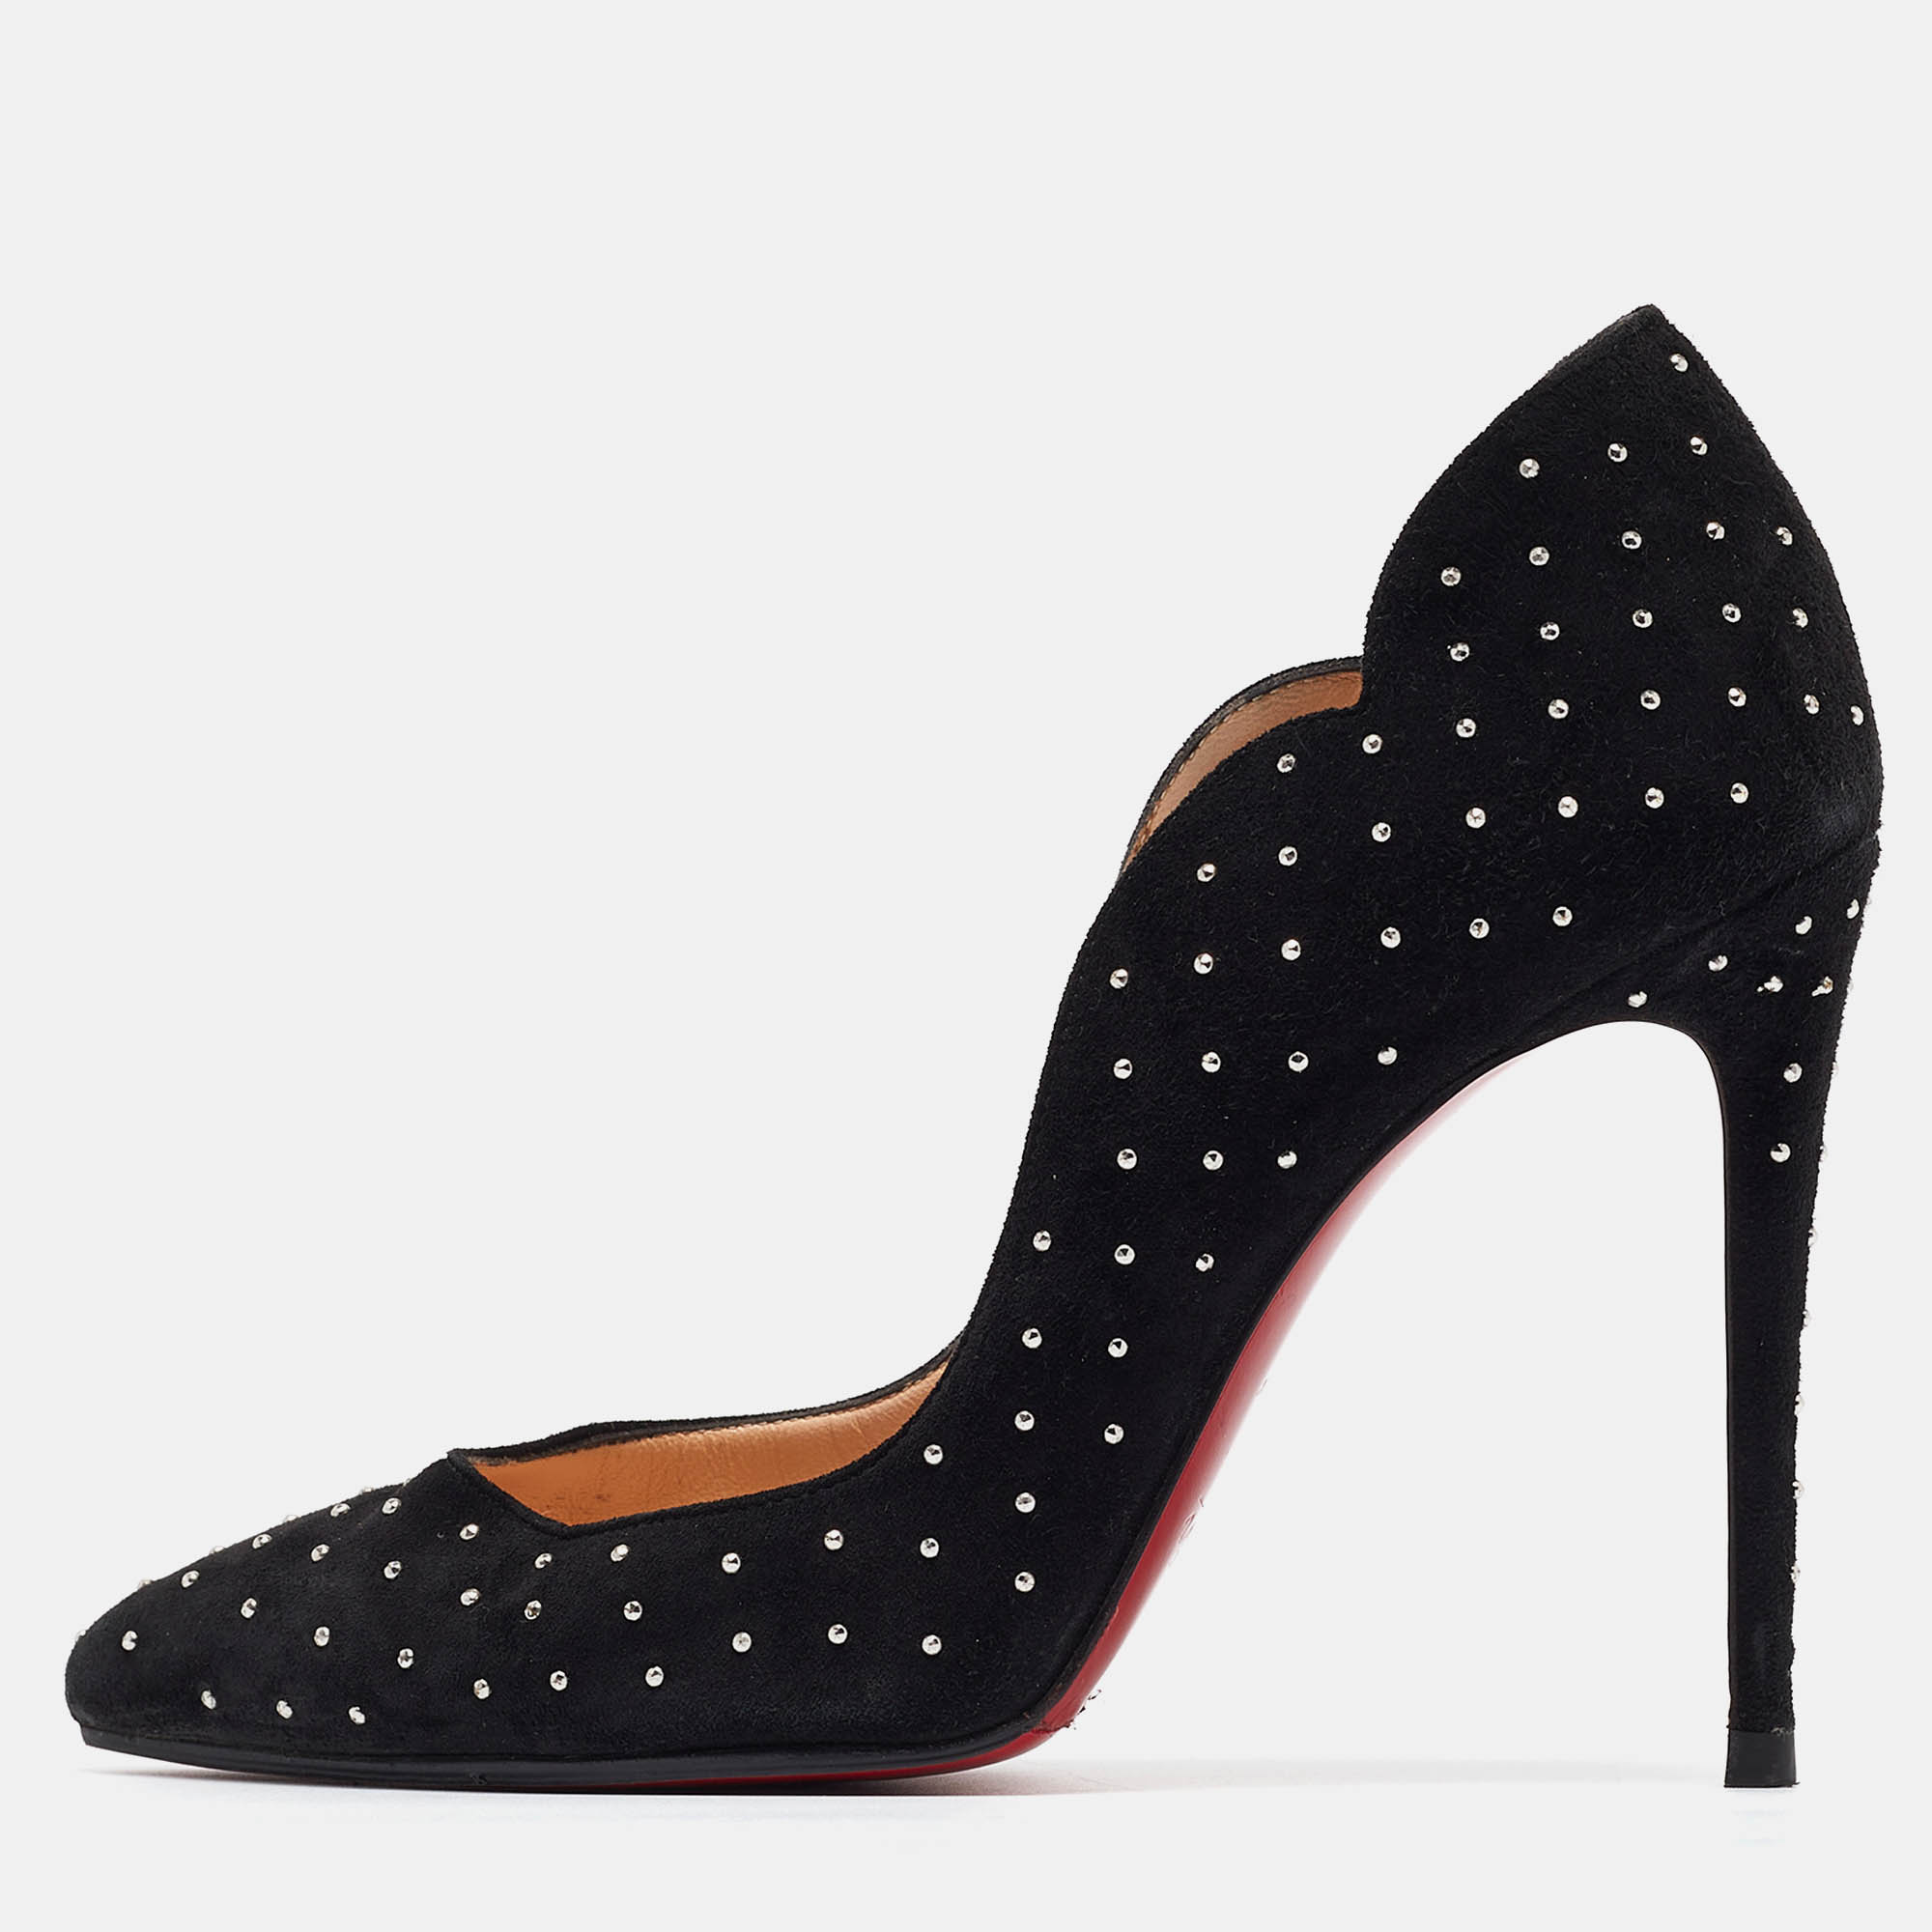 Pre-owned Christian Louboutin Black Studded Suede Hot Chick Pumps Size 36